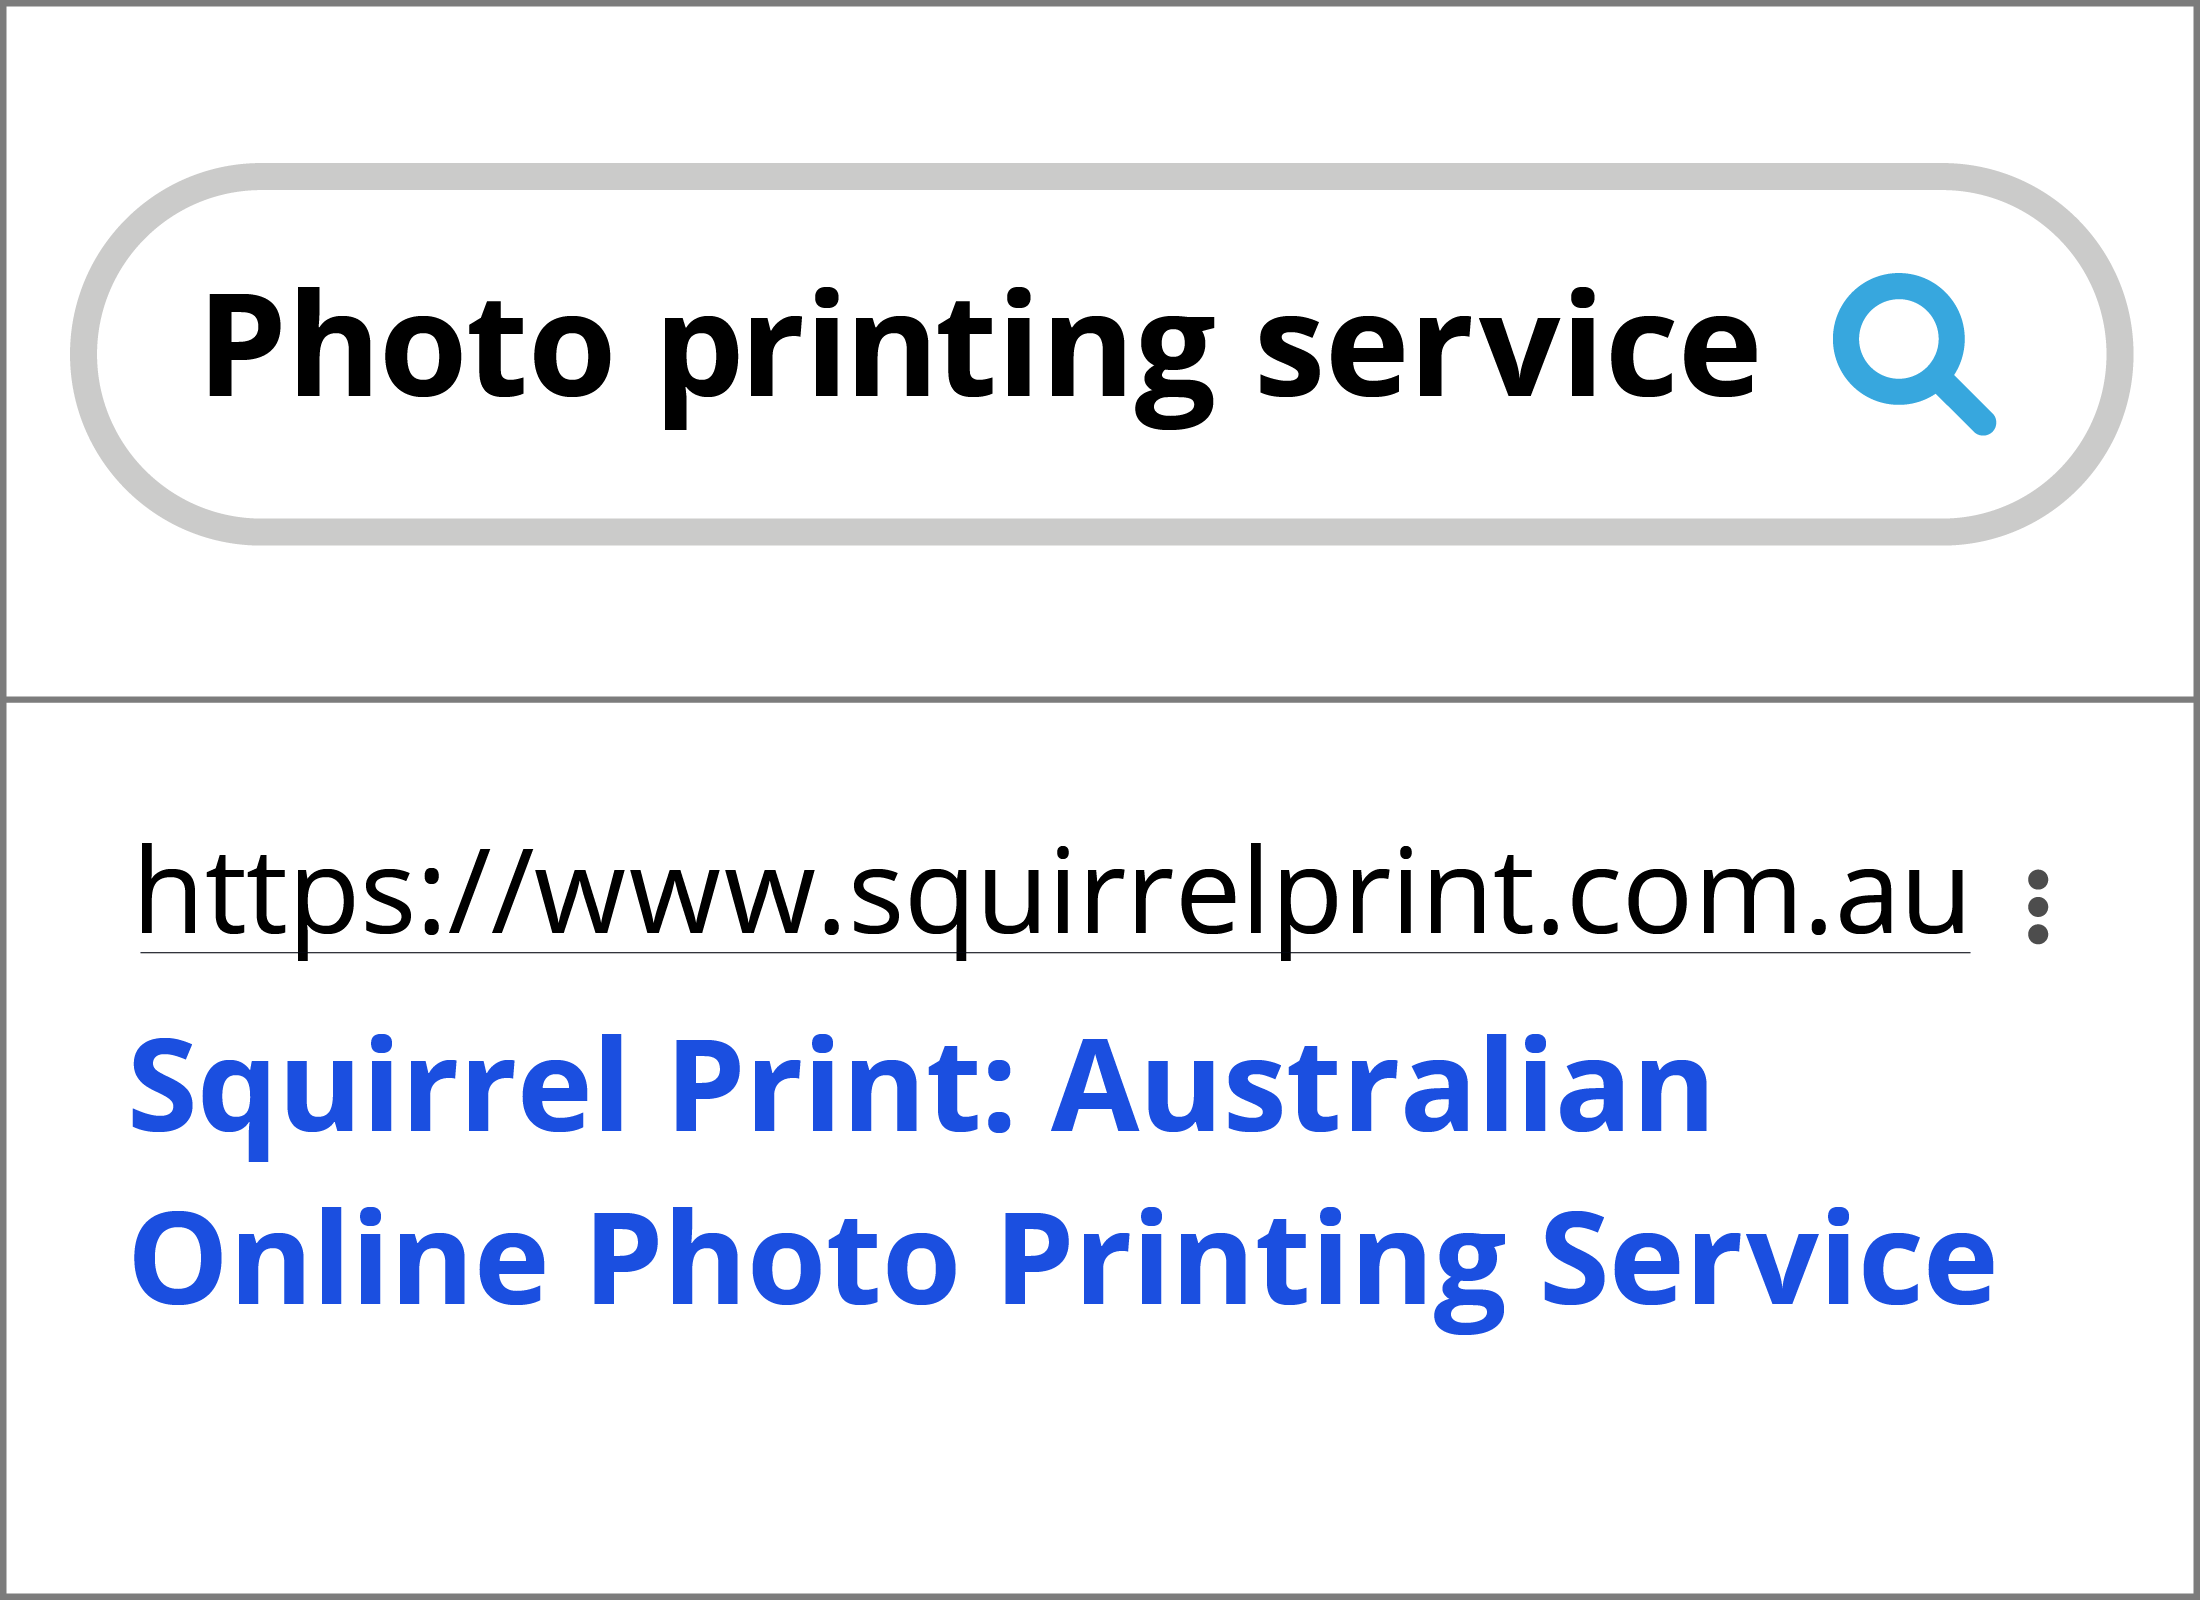 A fictional advertisement on a web page for our Squirrel Print company